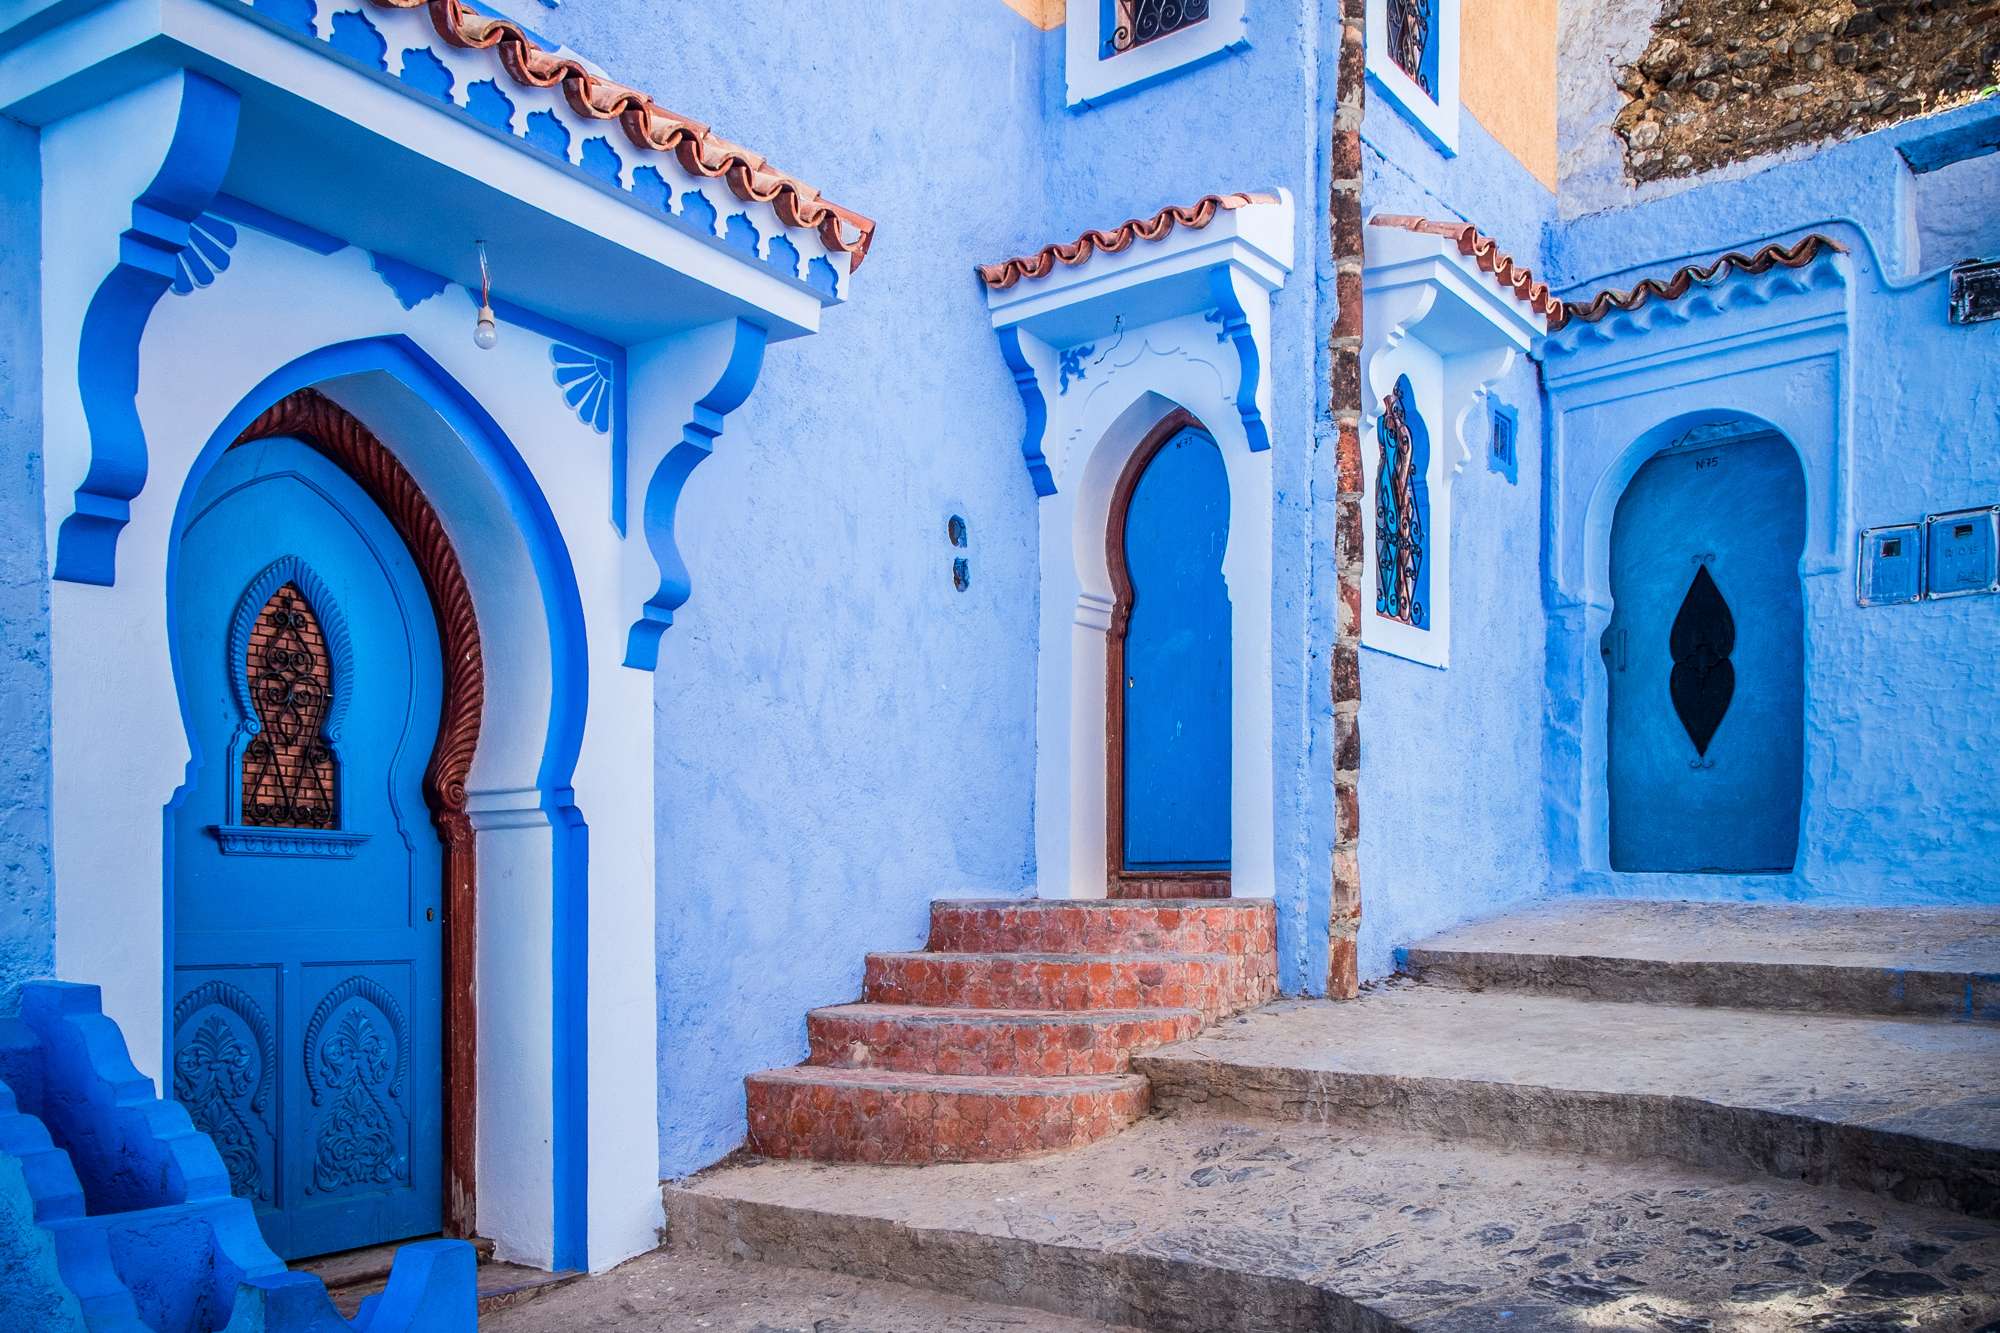 Chefchaouen city guided tours to explore the medina sites of the blue city